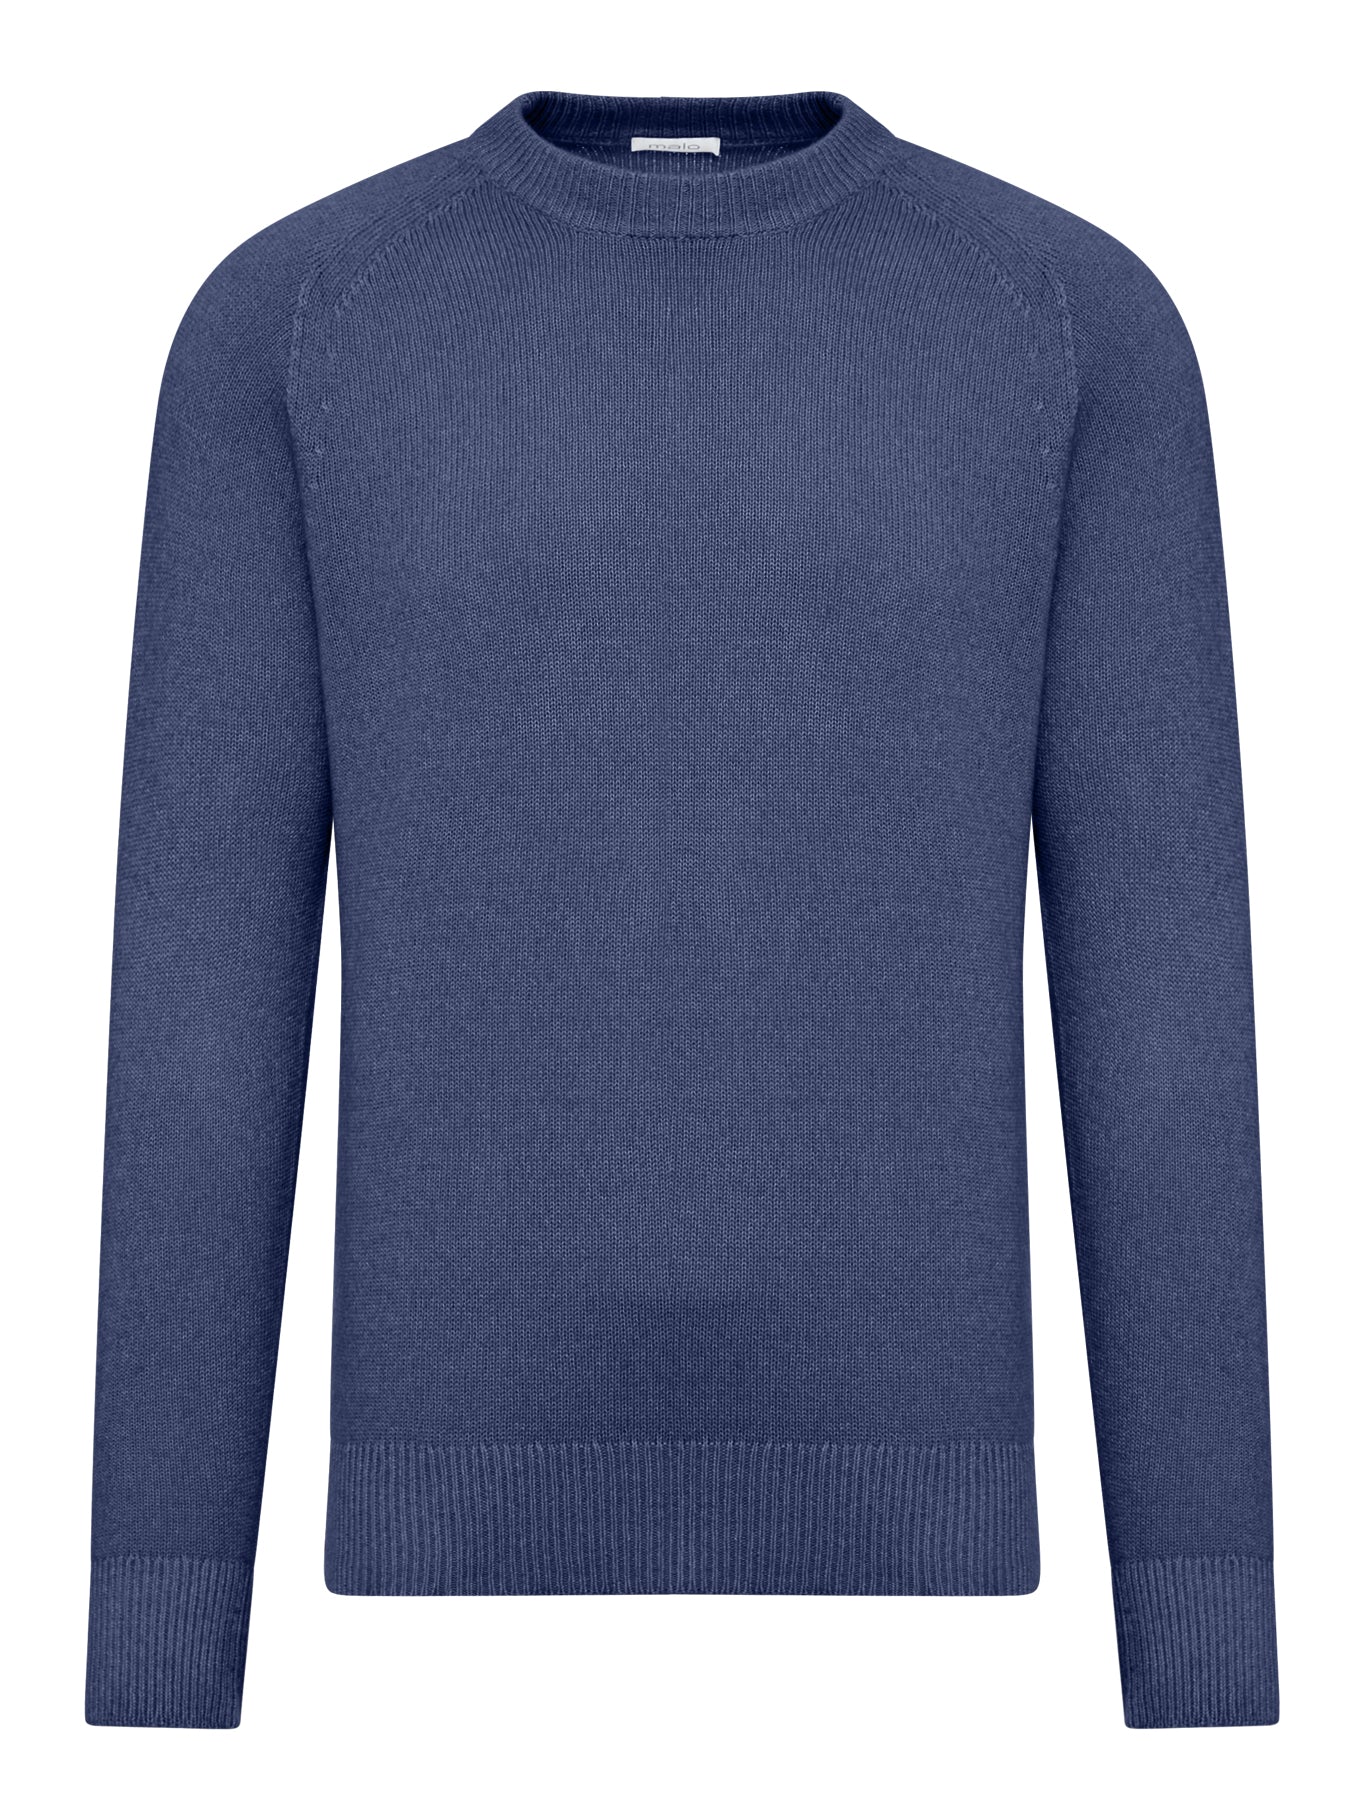 Cashmere Jumper by Malo